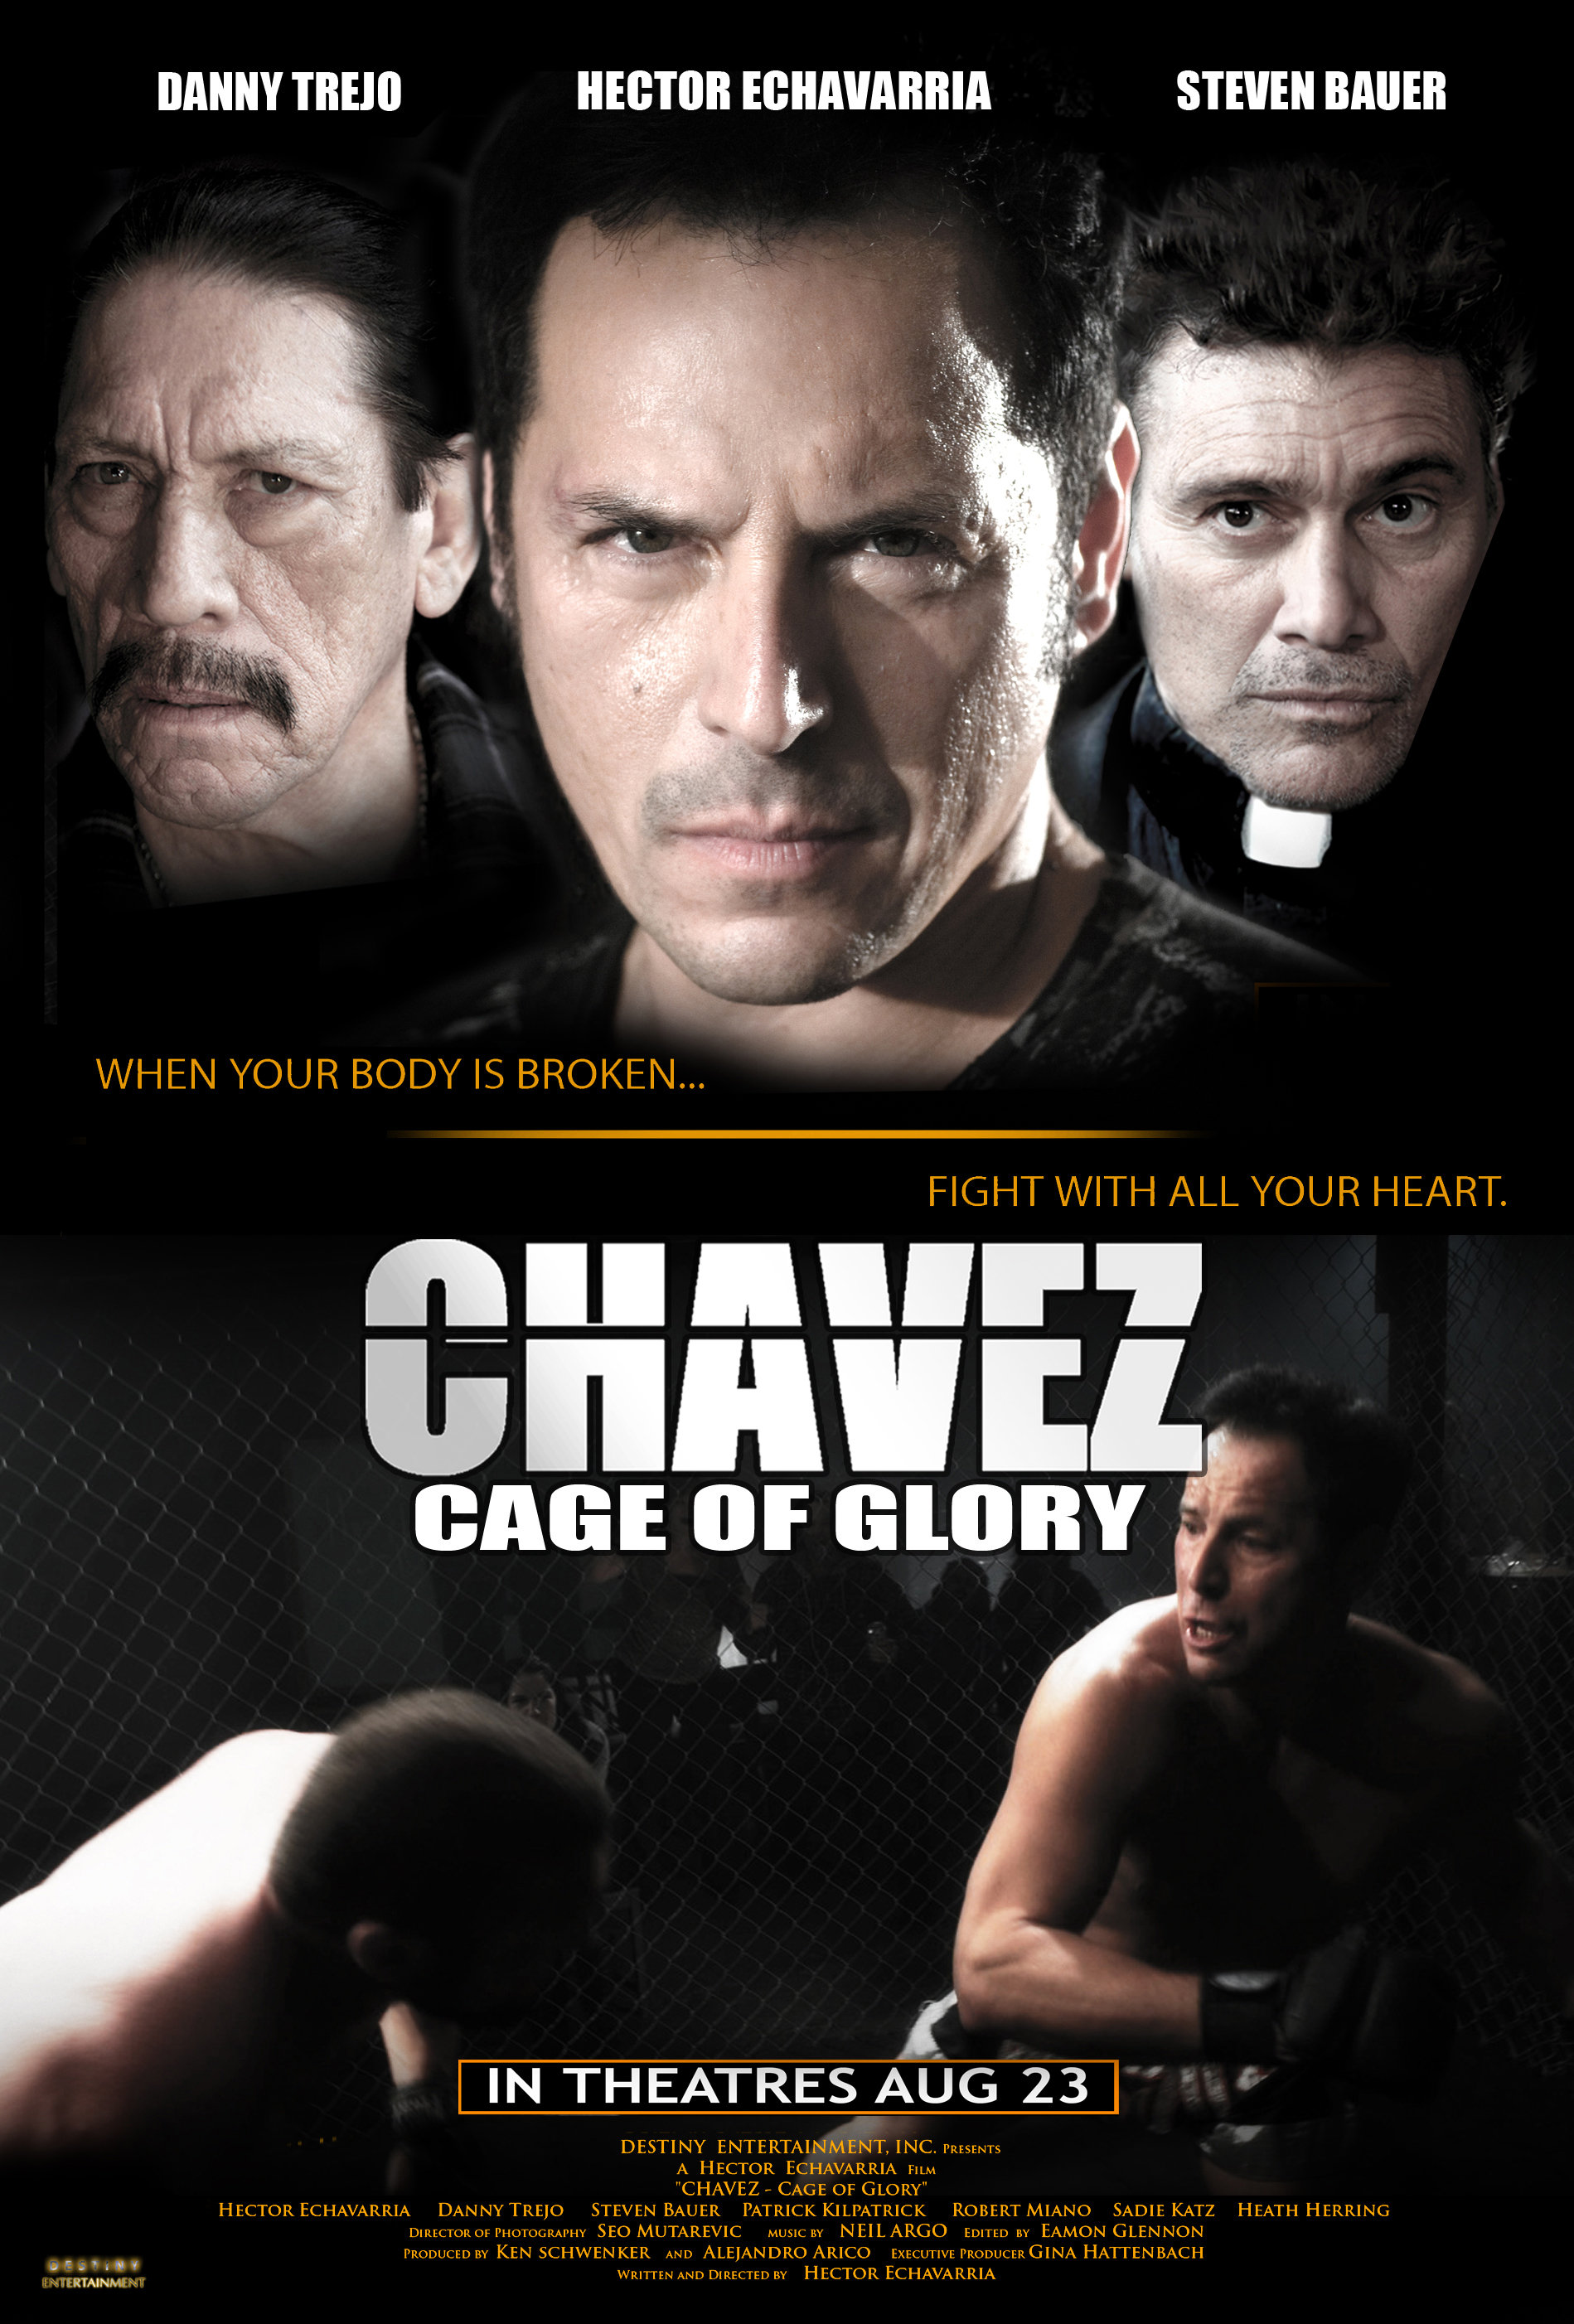 Steven Bauer, Danny Trejo and Hector Echavarria in Chavez Cage of Glory (2013)